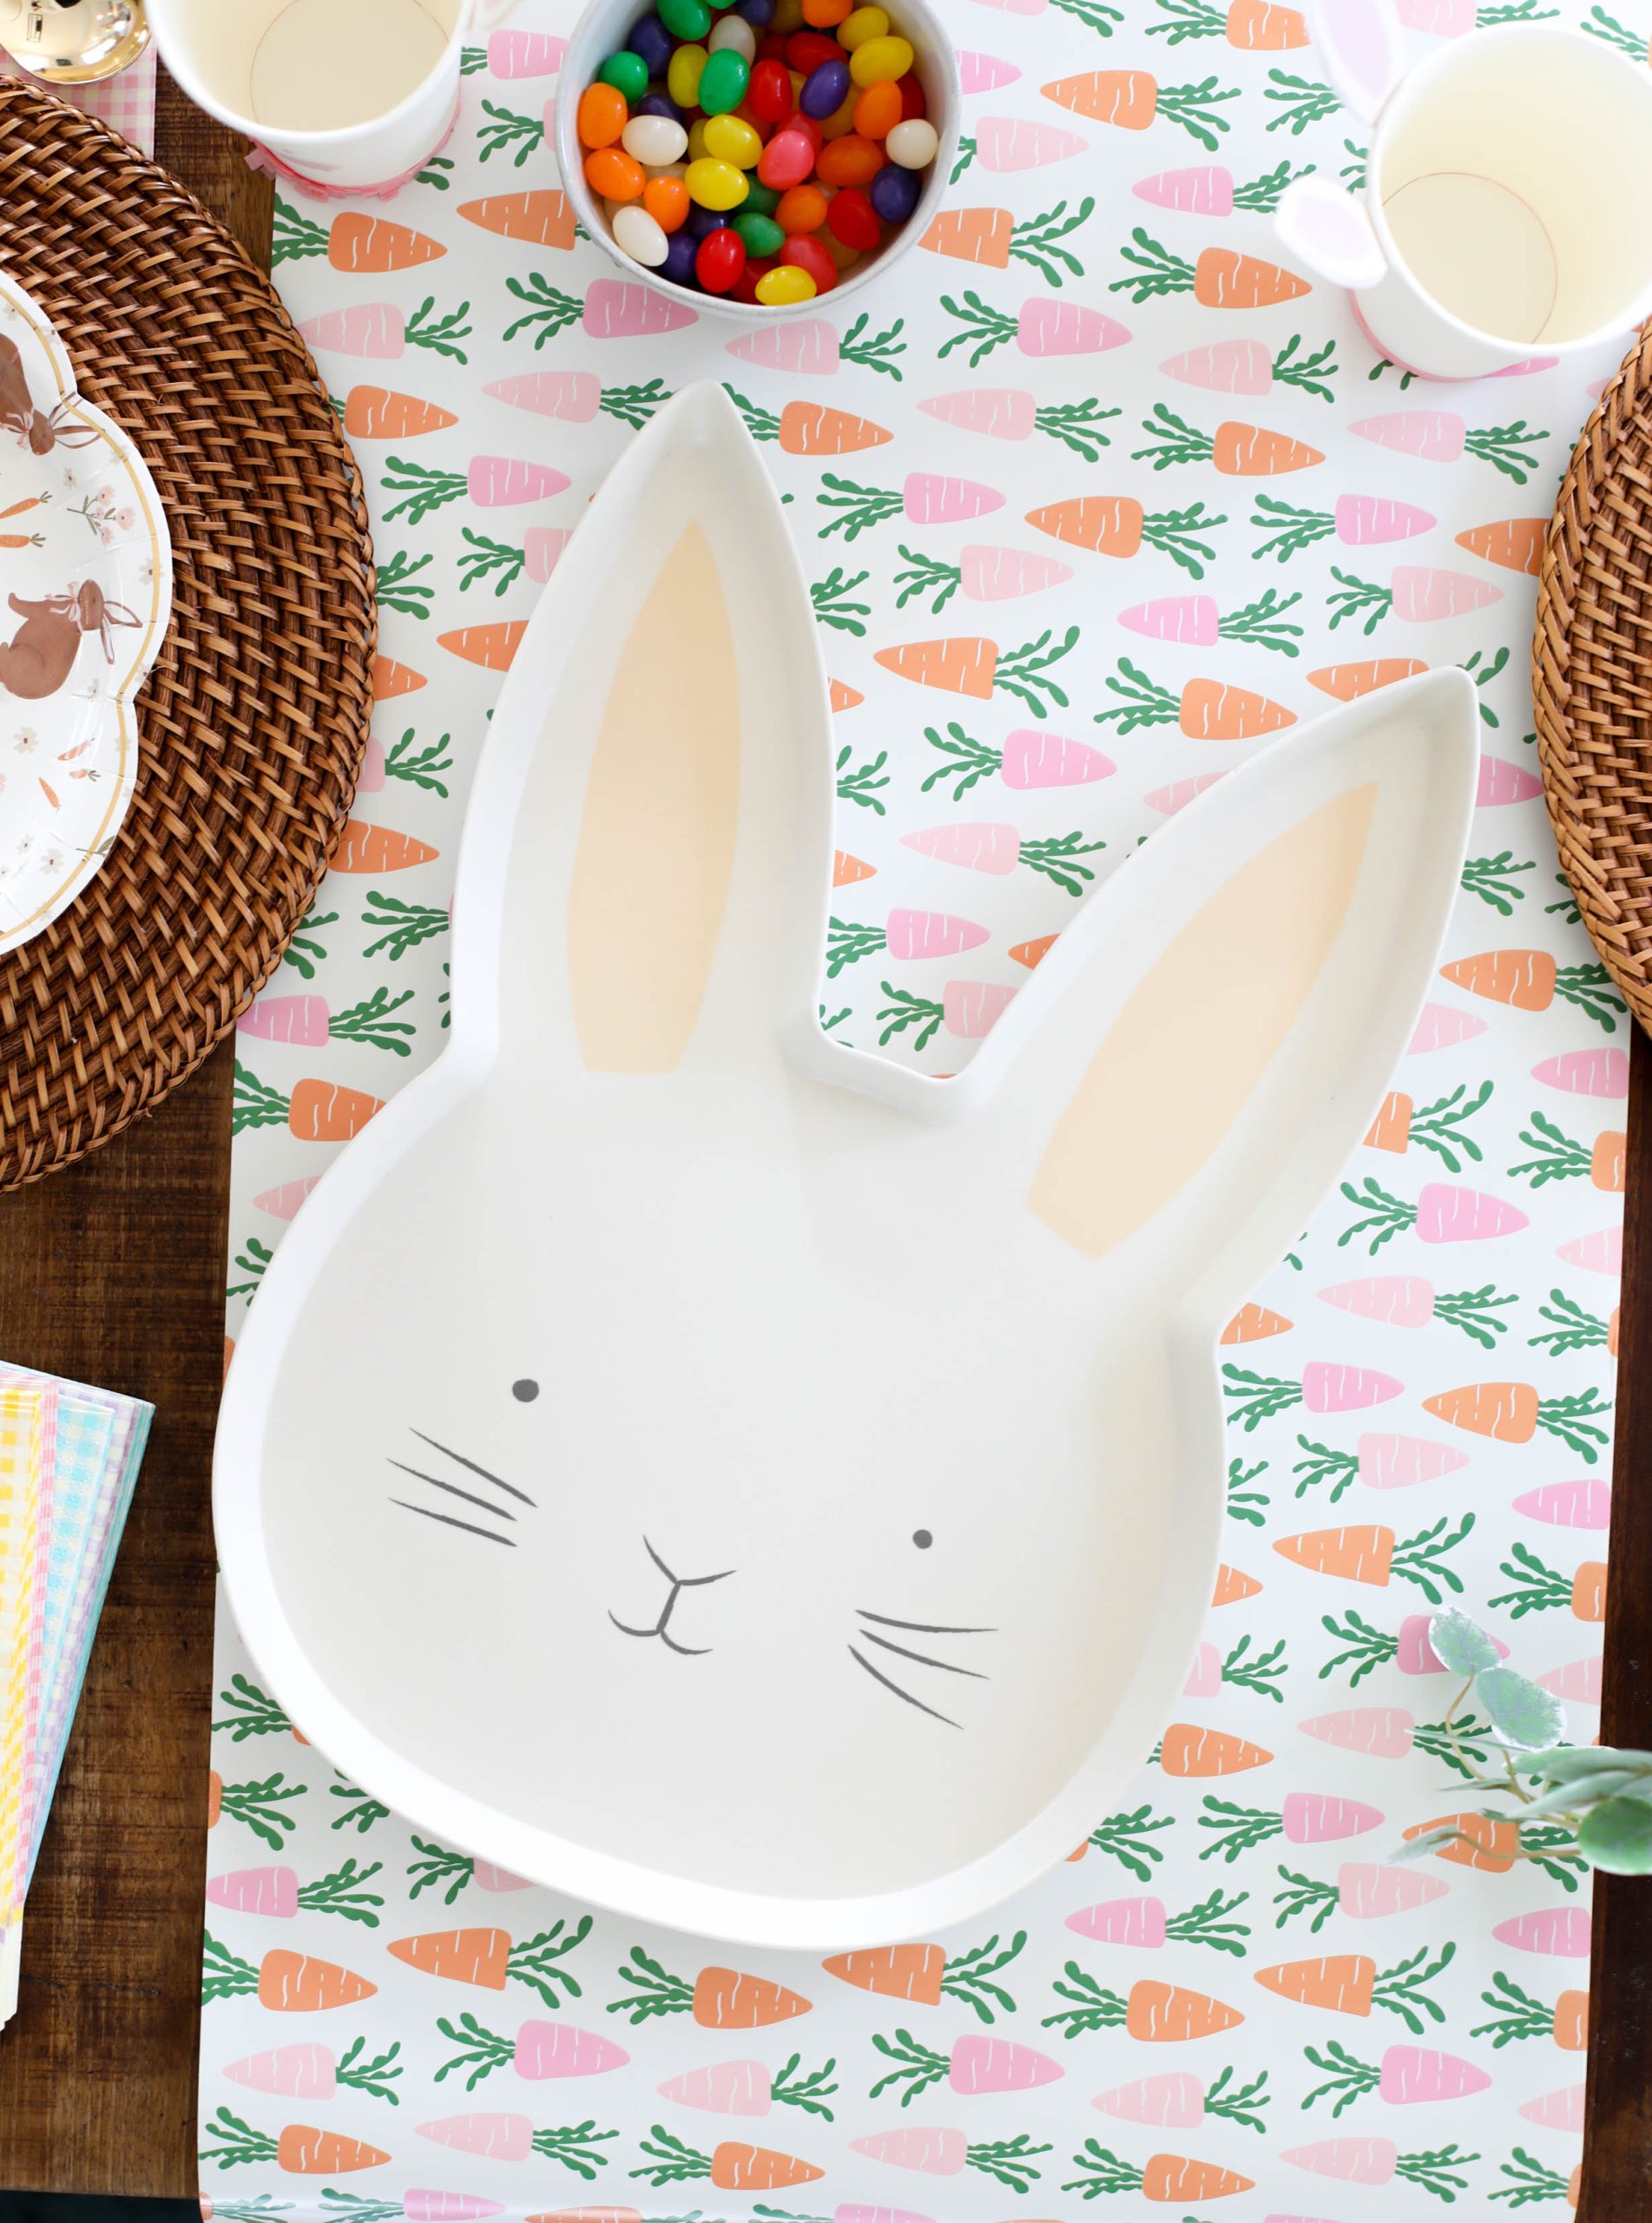 Easter rabbit tray on a themed table